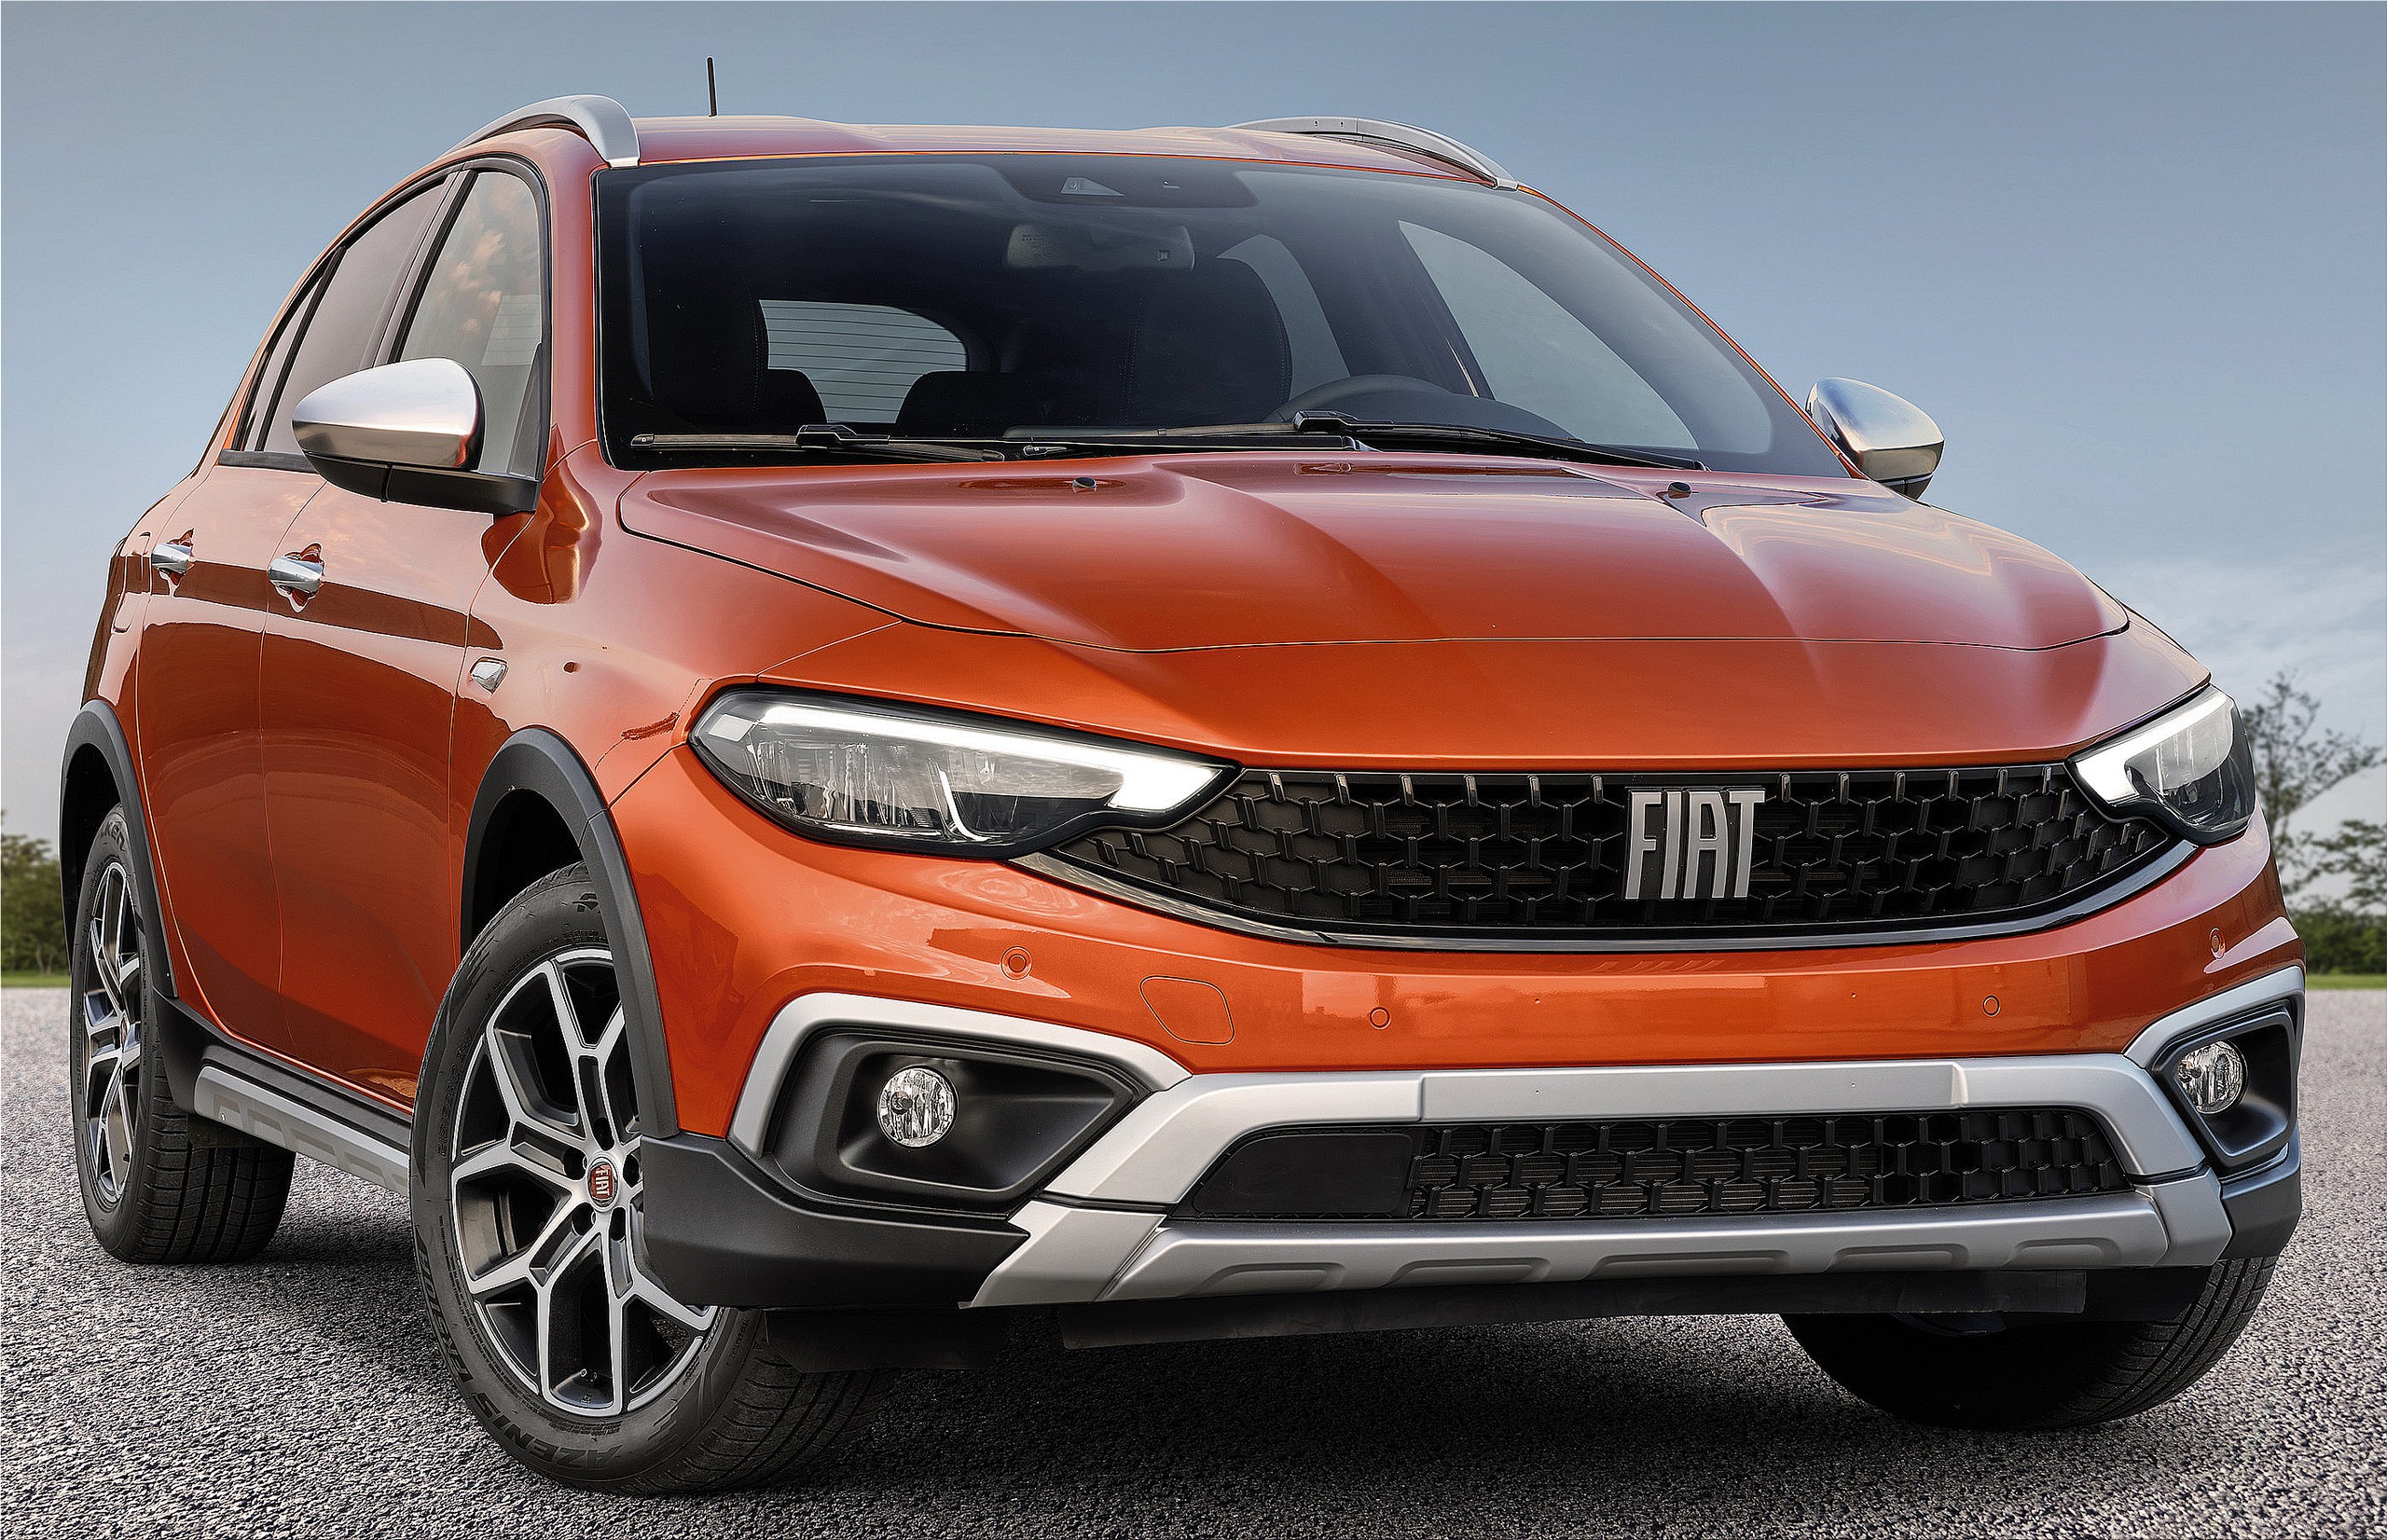 The new Fiat Tipo renewed both inside and out